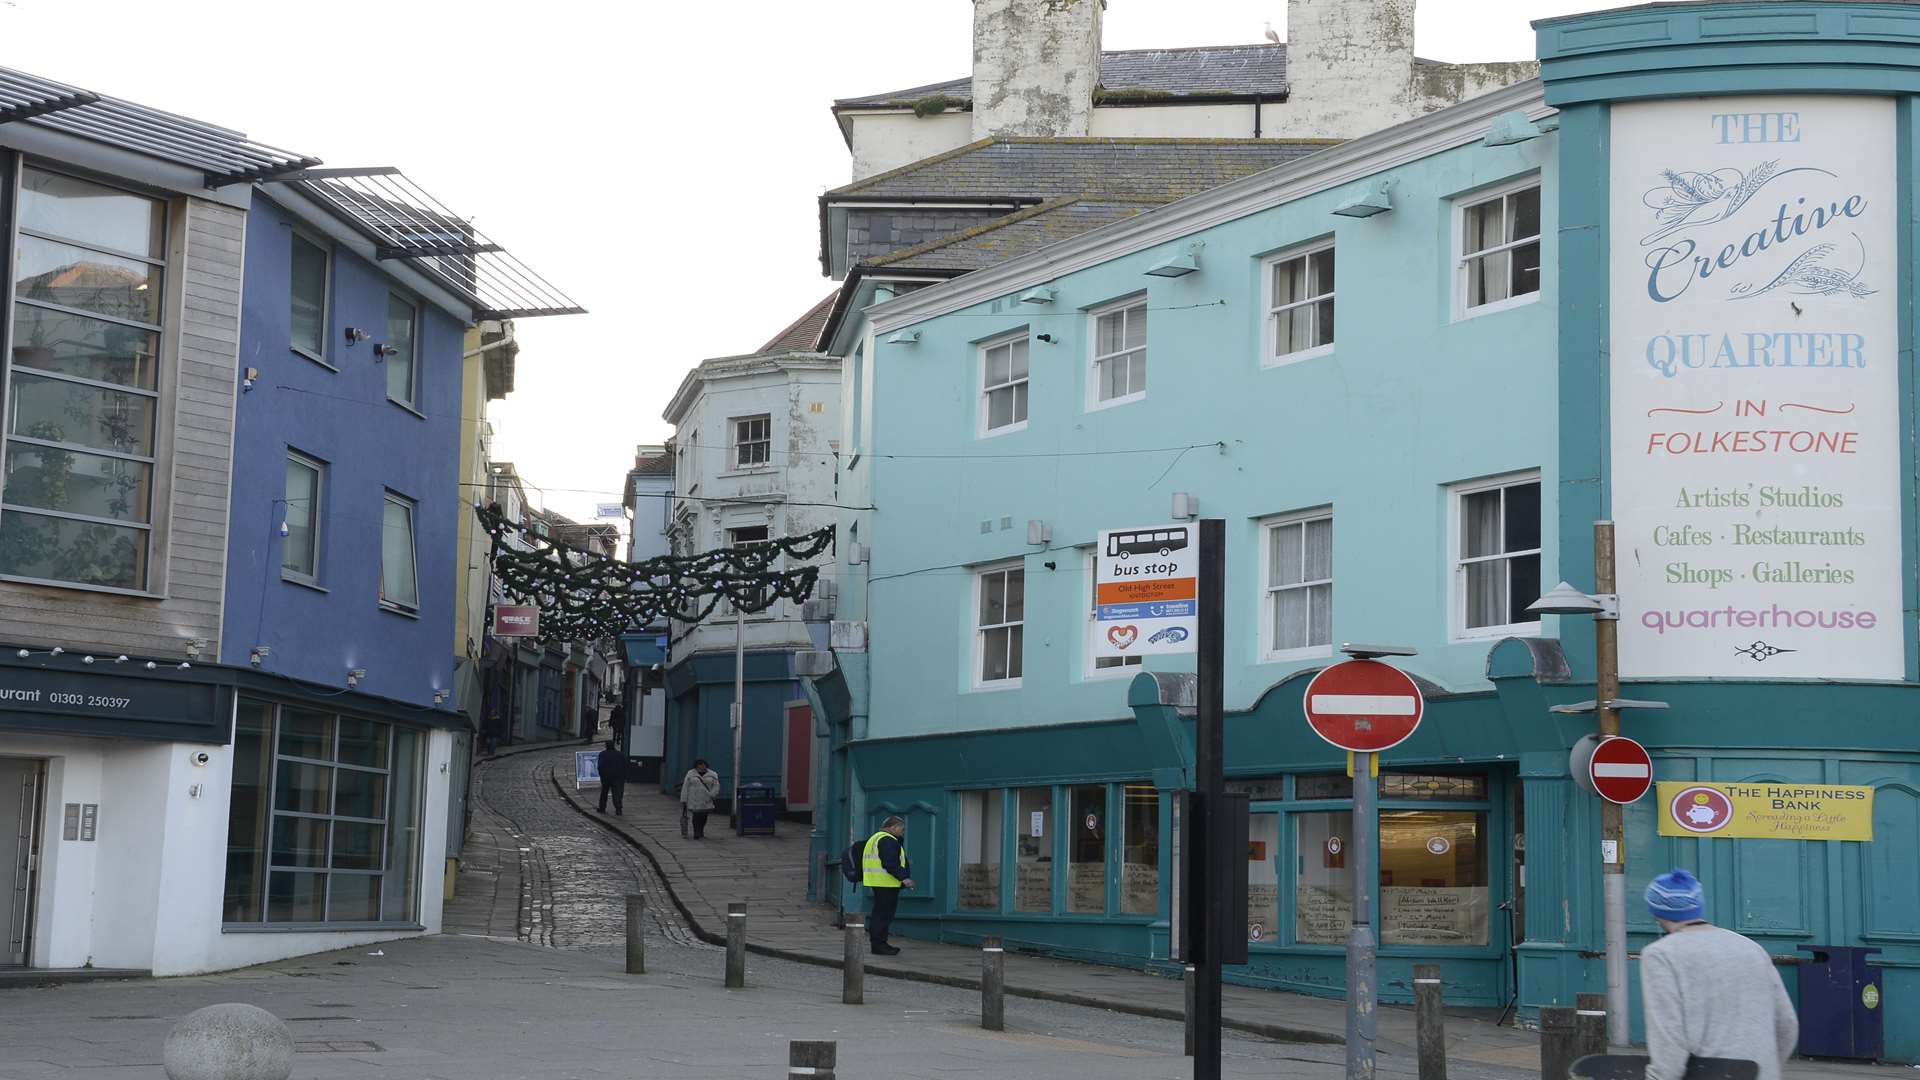 The Old High Street with the Creative Quarter signage